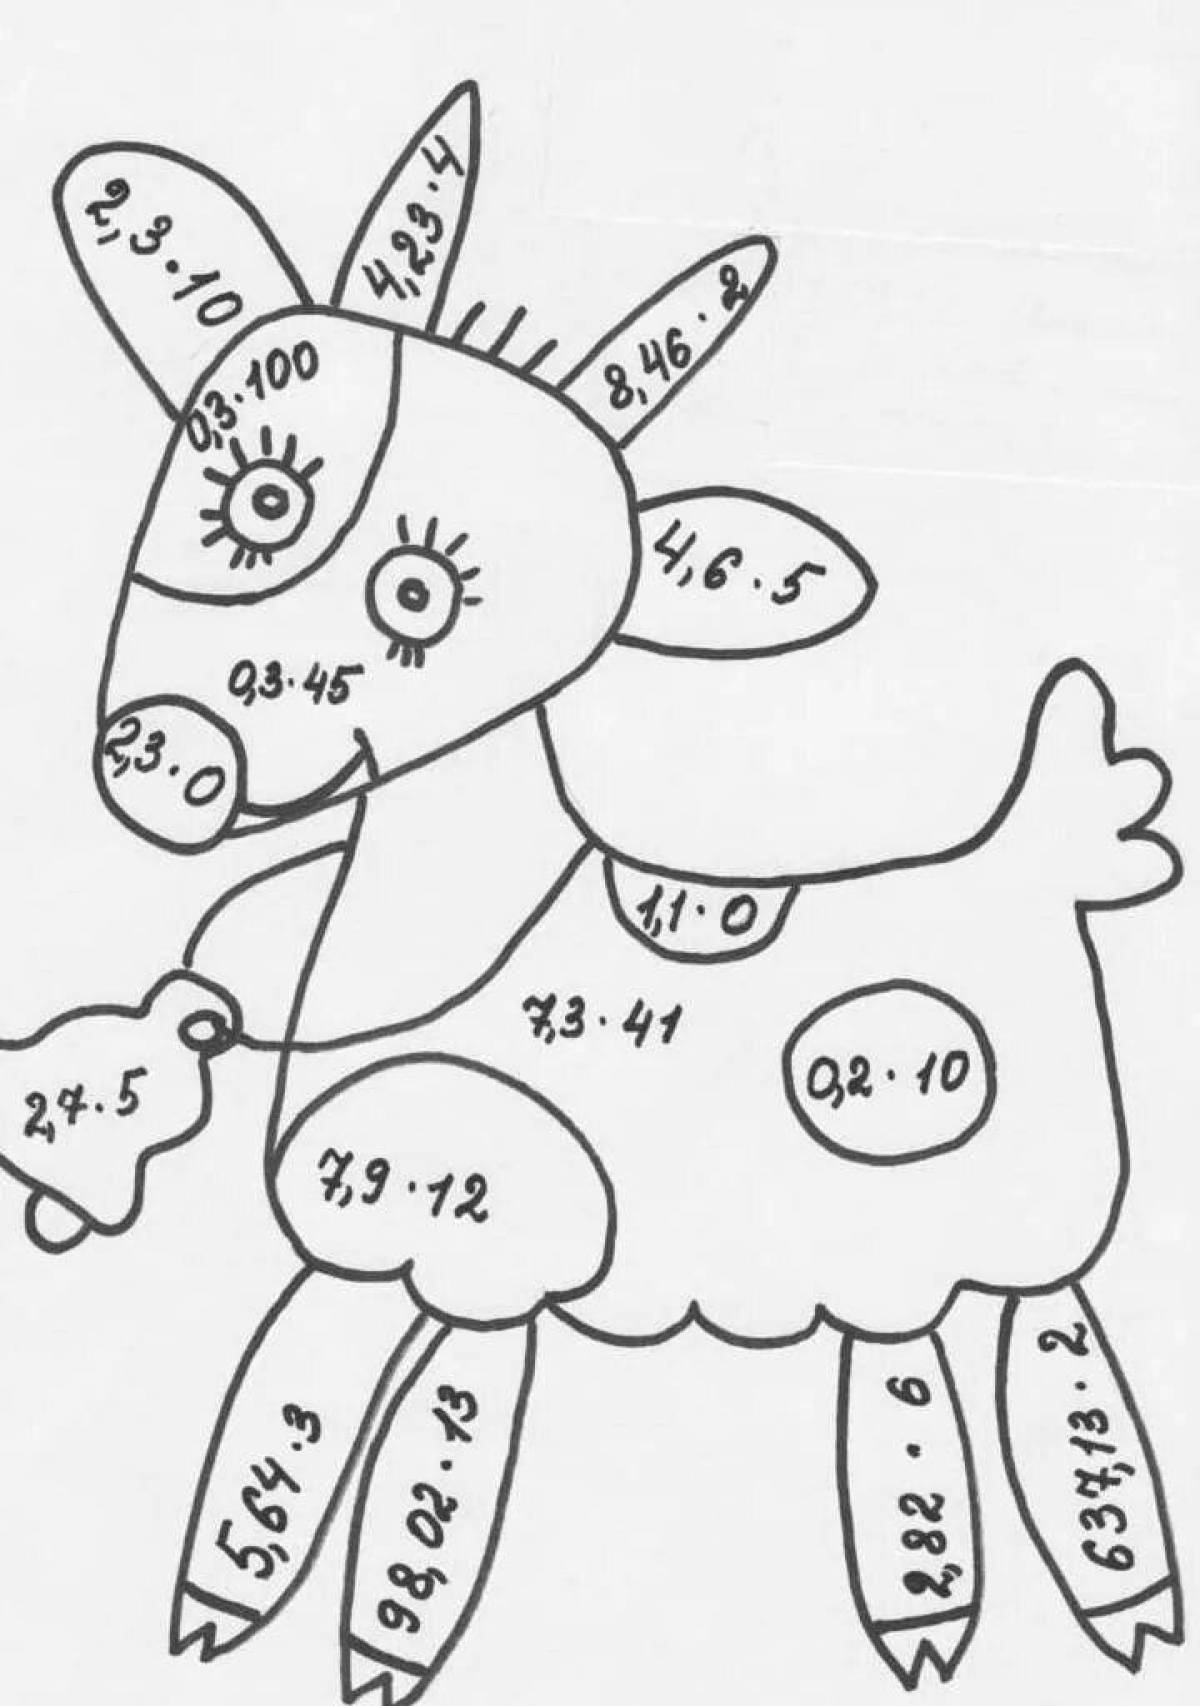 Coloring for colorful math fractions